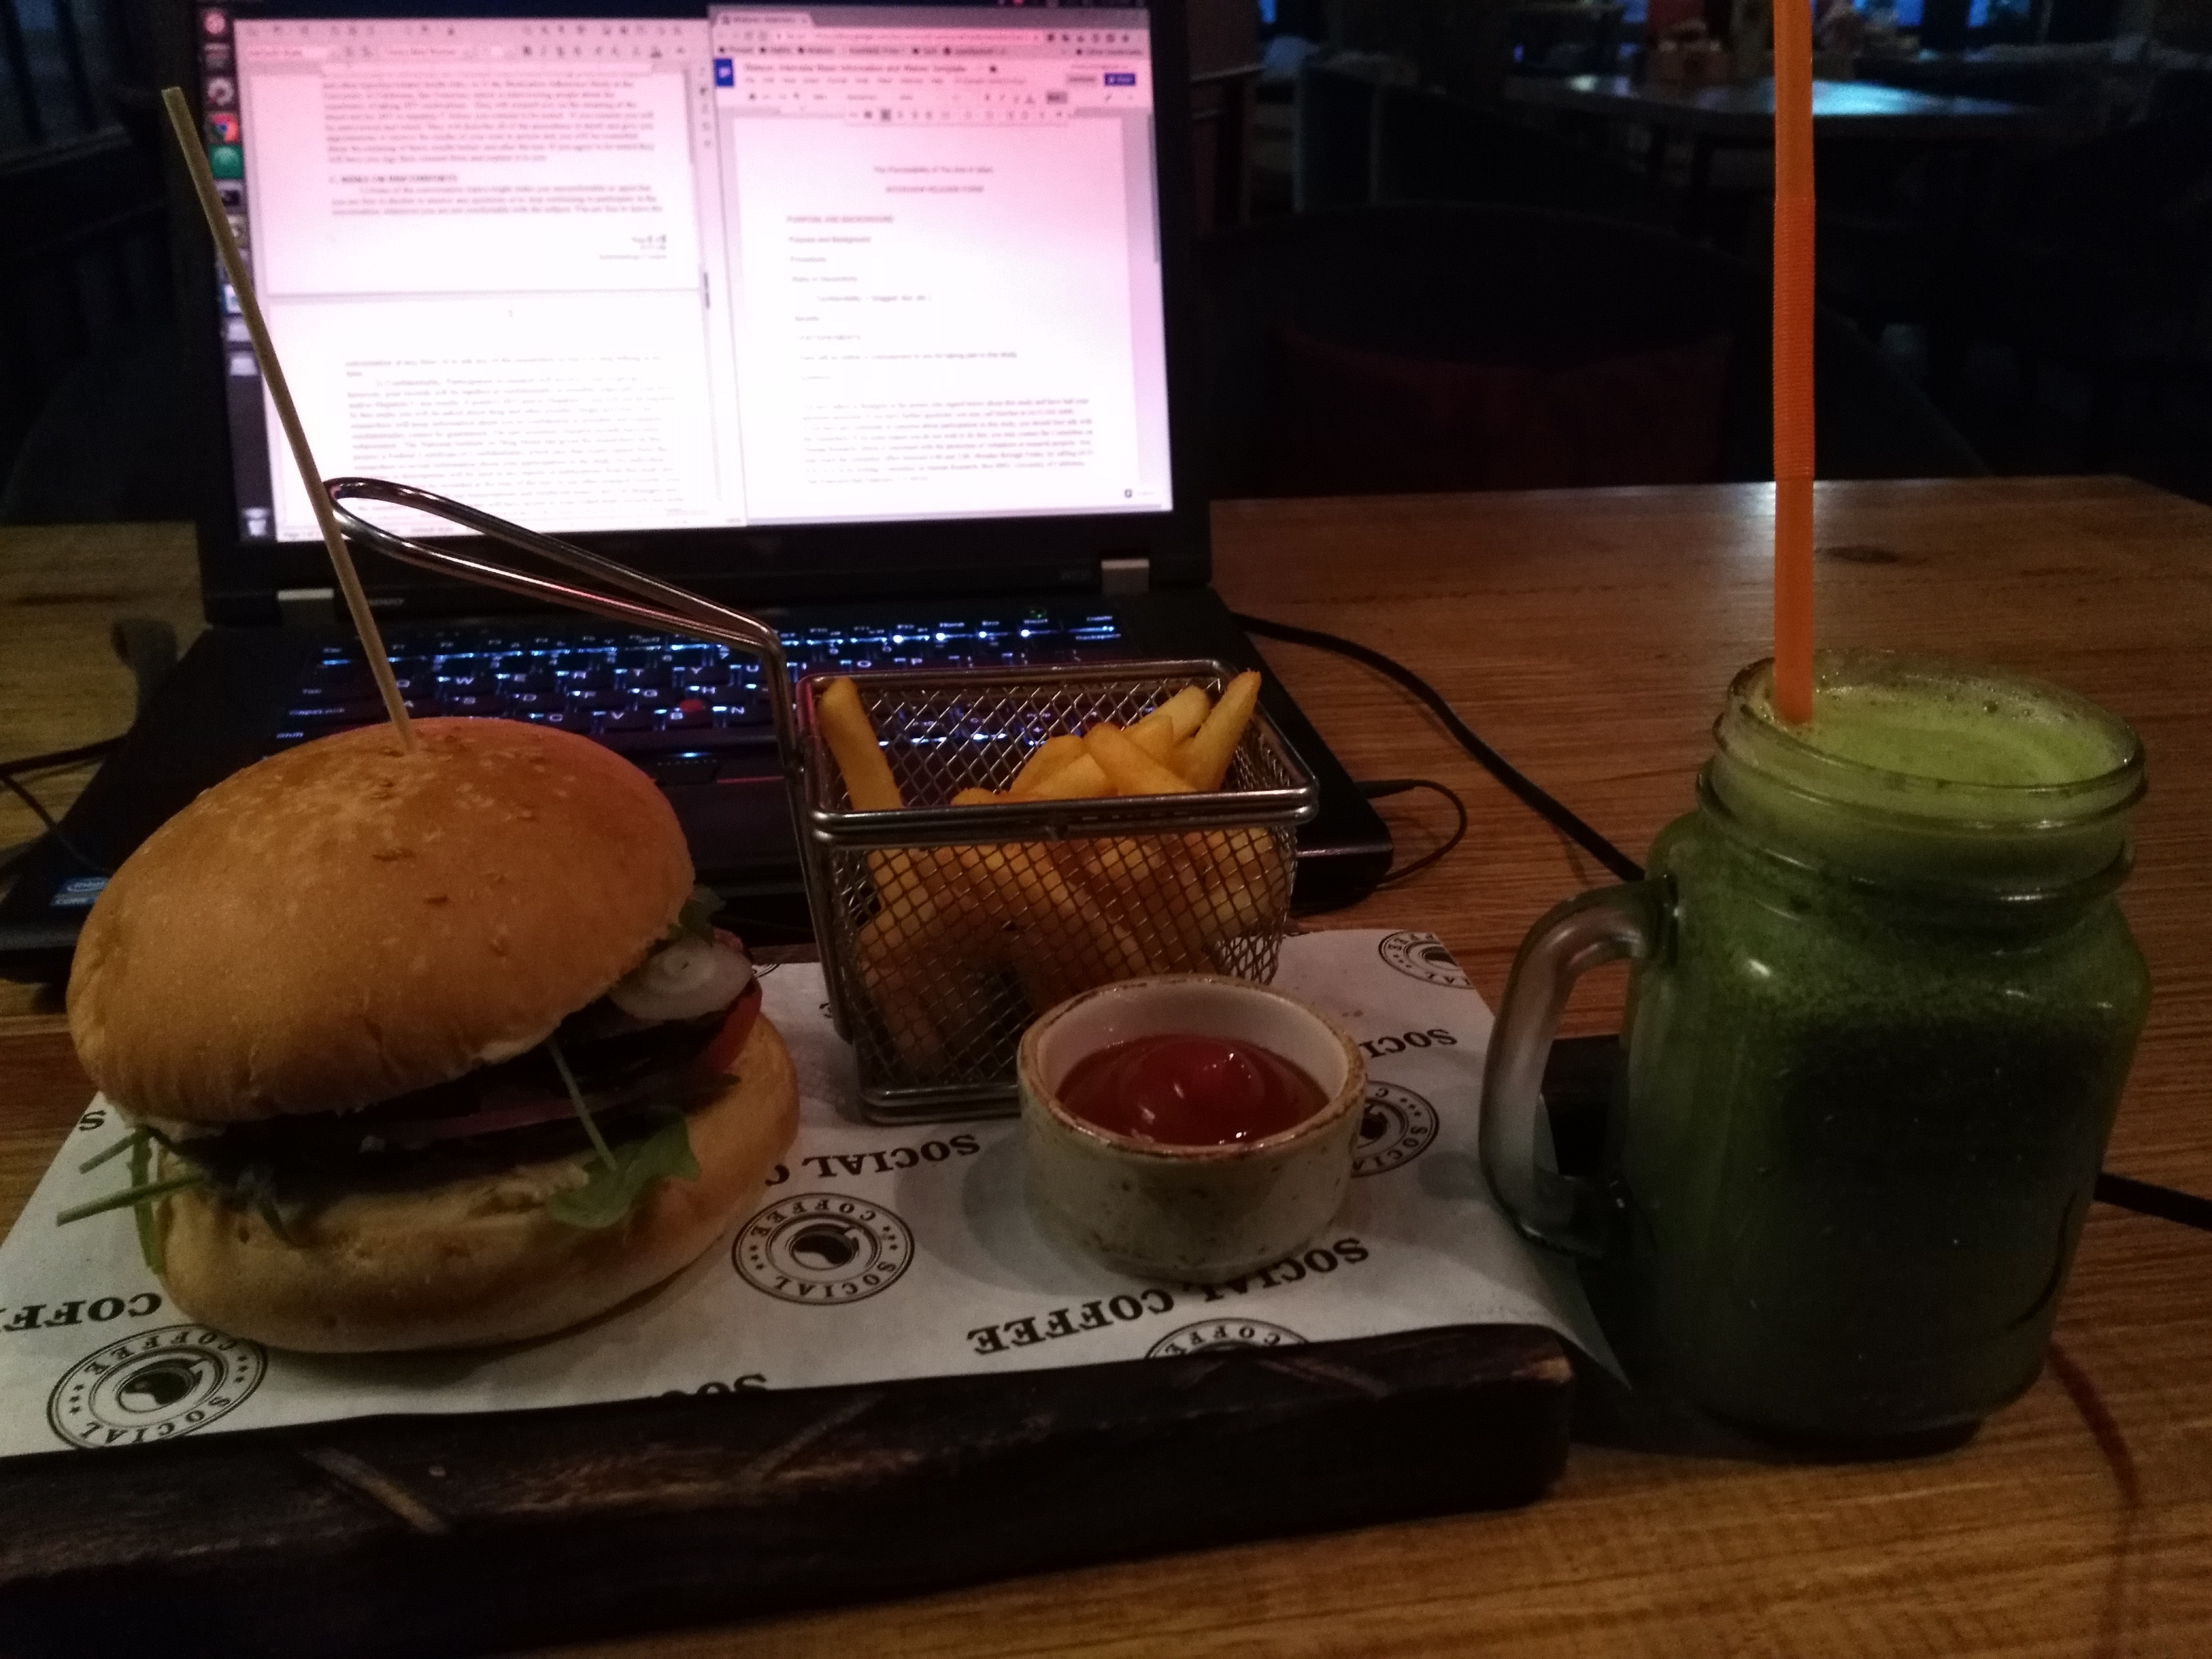 Veggie burger, green smoothie, and fries. One of the few vegan meals I've had since the start of my Watson.